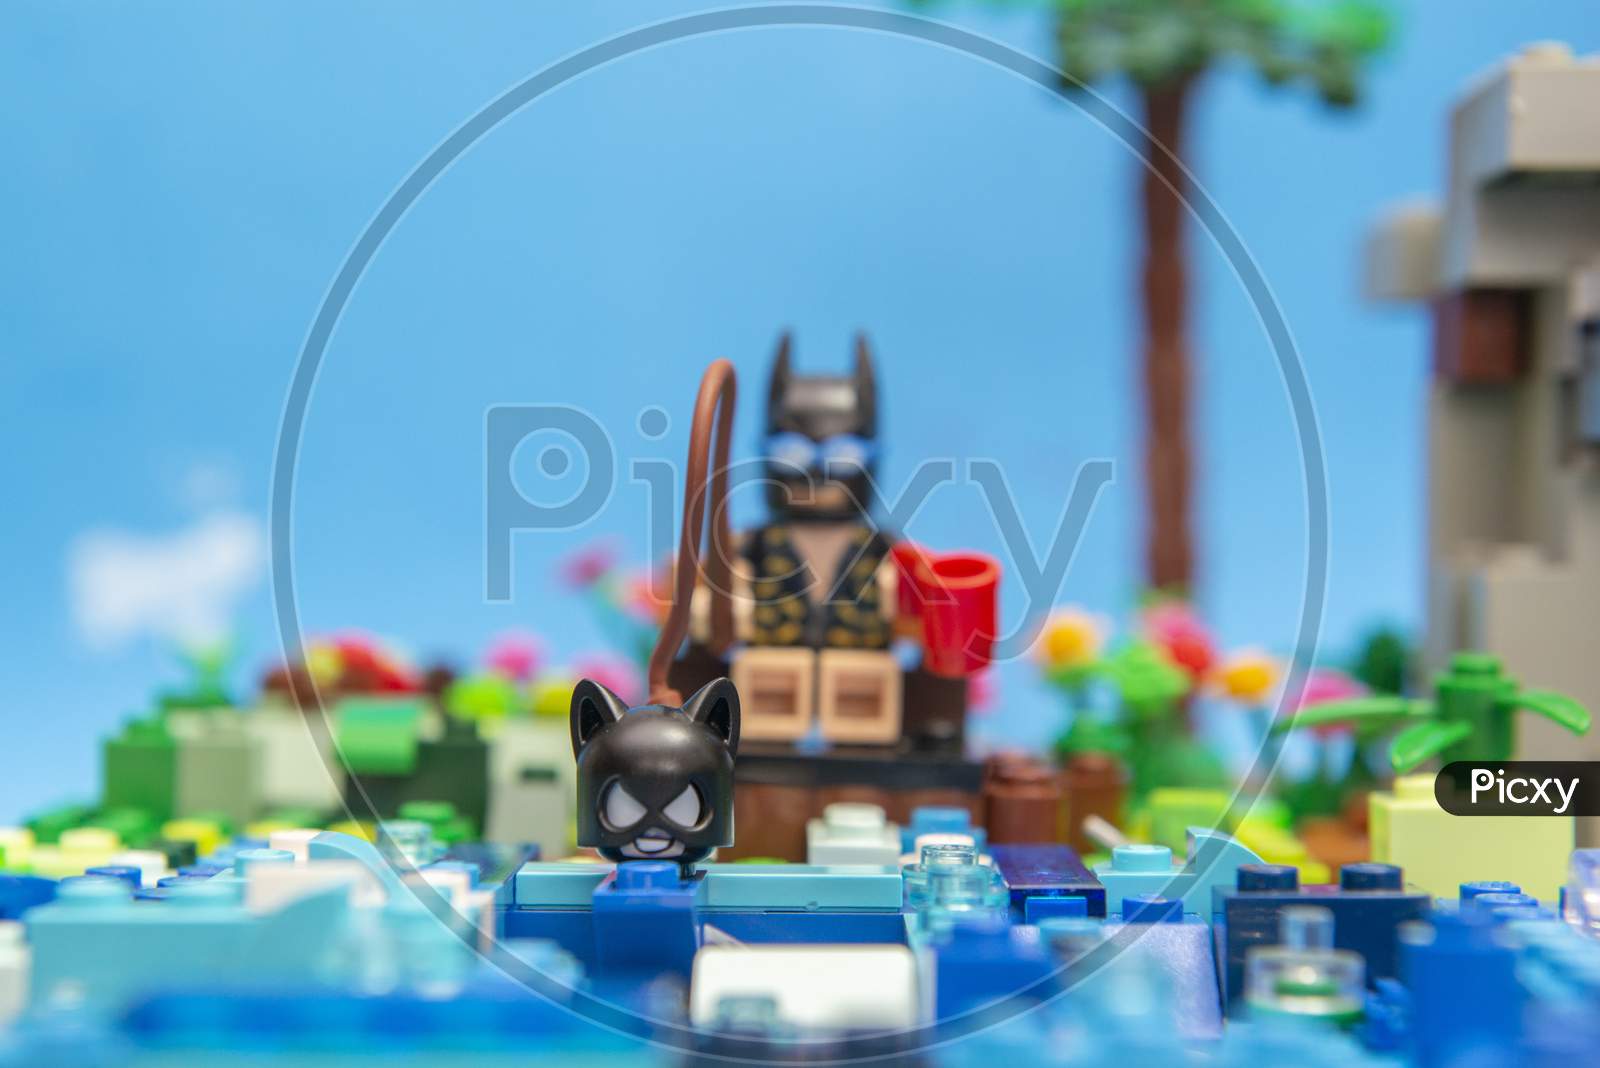 Florianopolis, Brazil. September 20, 2020: Batman Minifigure Fishing Catwoman In Lake. Concept Of Fishing Love. Super Heroes Love It Too. Selective Focus.